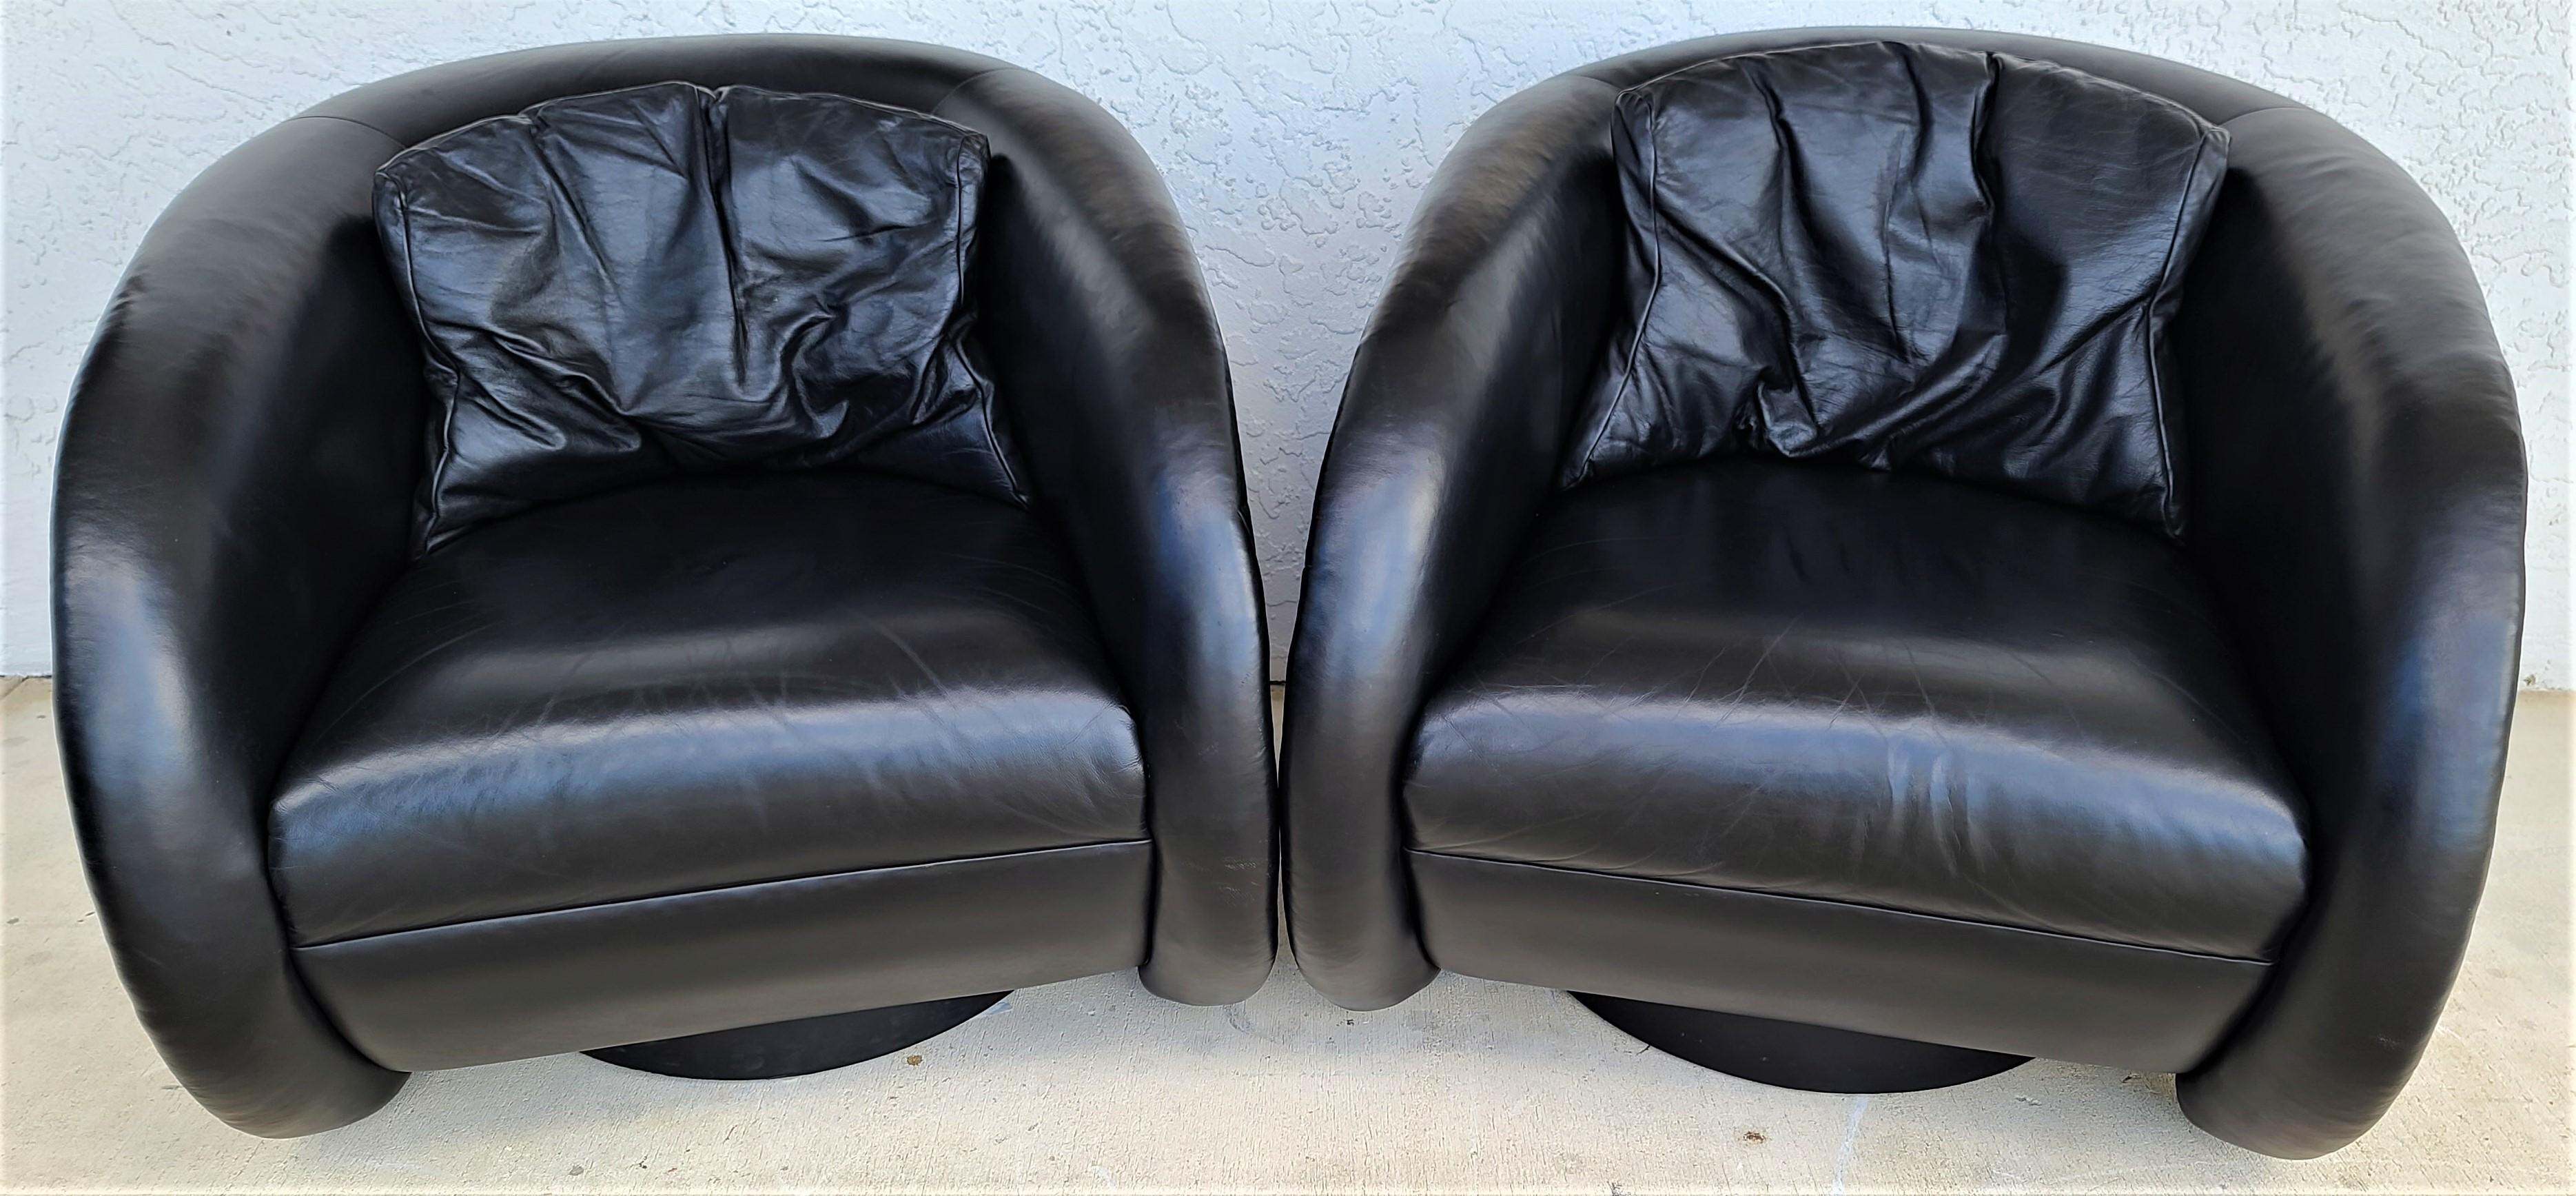 Offering one of our recent Palm Beach Estate fine furniture acquisitions of a
Set of 4 Mid-Century Modern black leather swivel barrel lounge chairs by Preview
Spectacularly designed chairs with a style that will never go out of fashion and made of